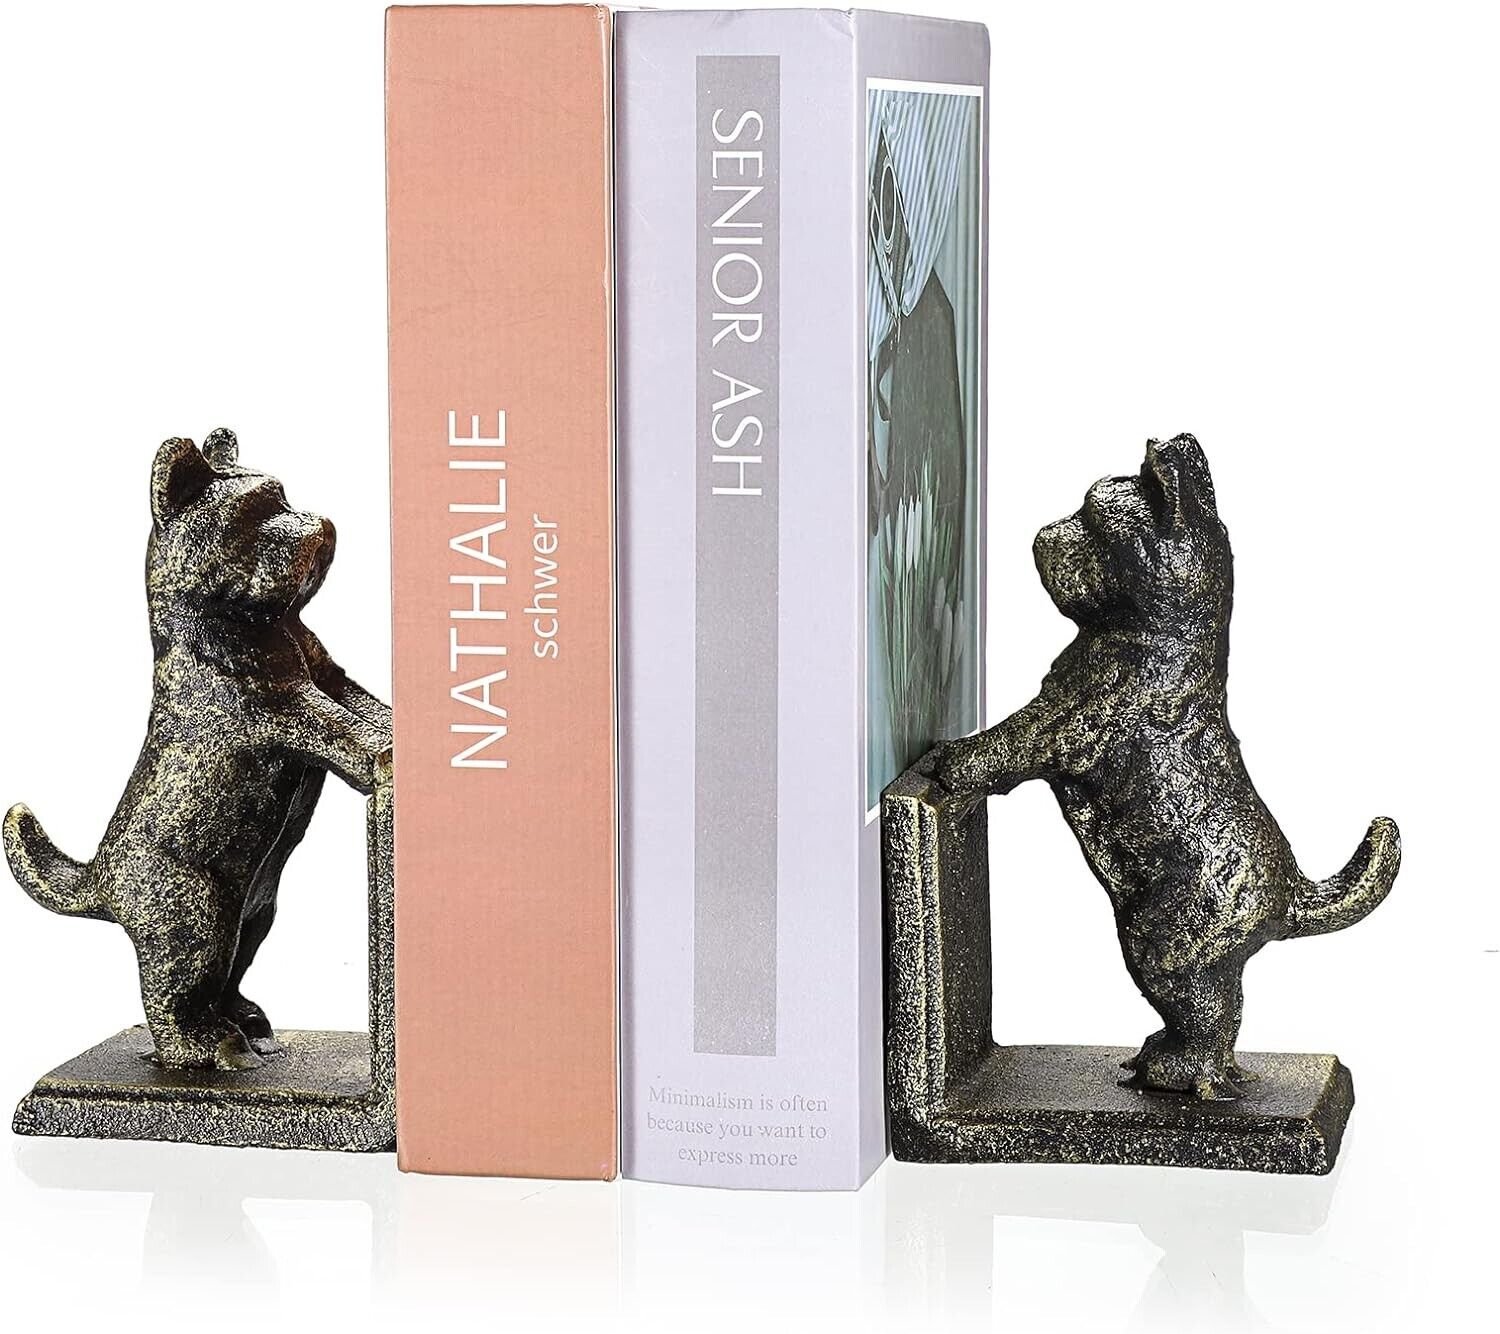 Cute Westie, Scottie or ... (when painted) Decorative Cast Iron Bookends  - New